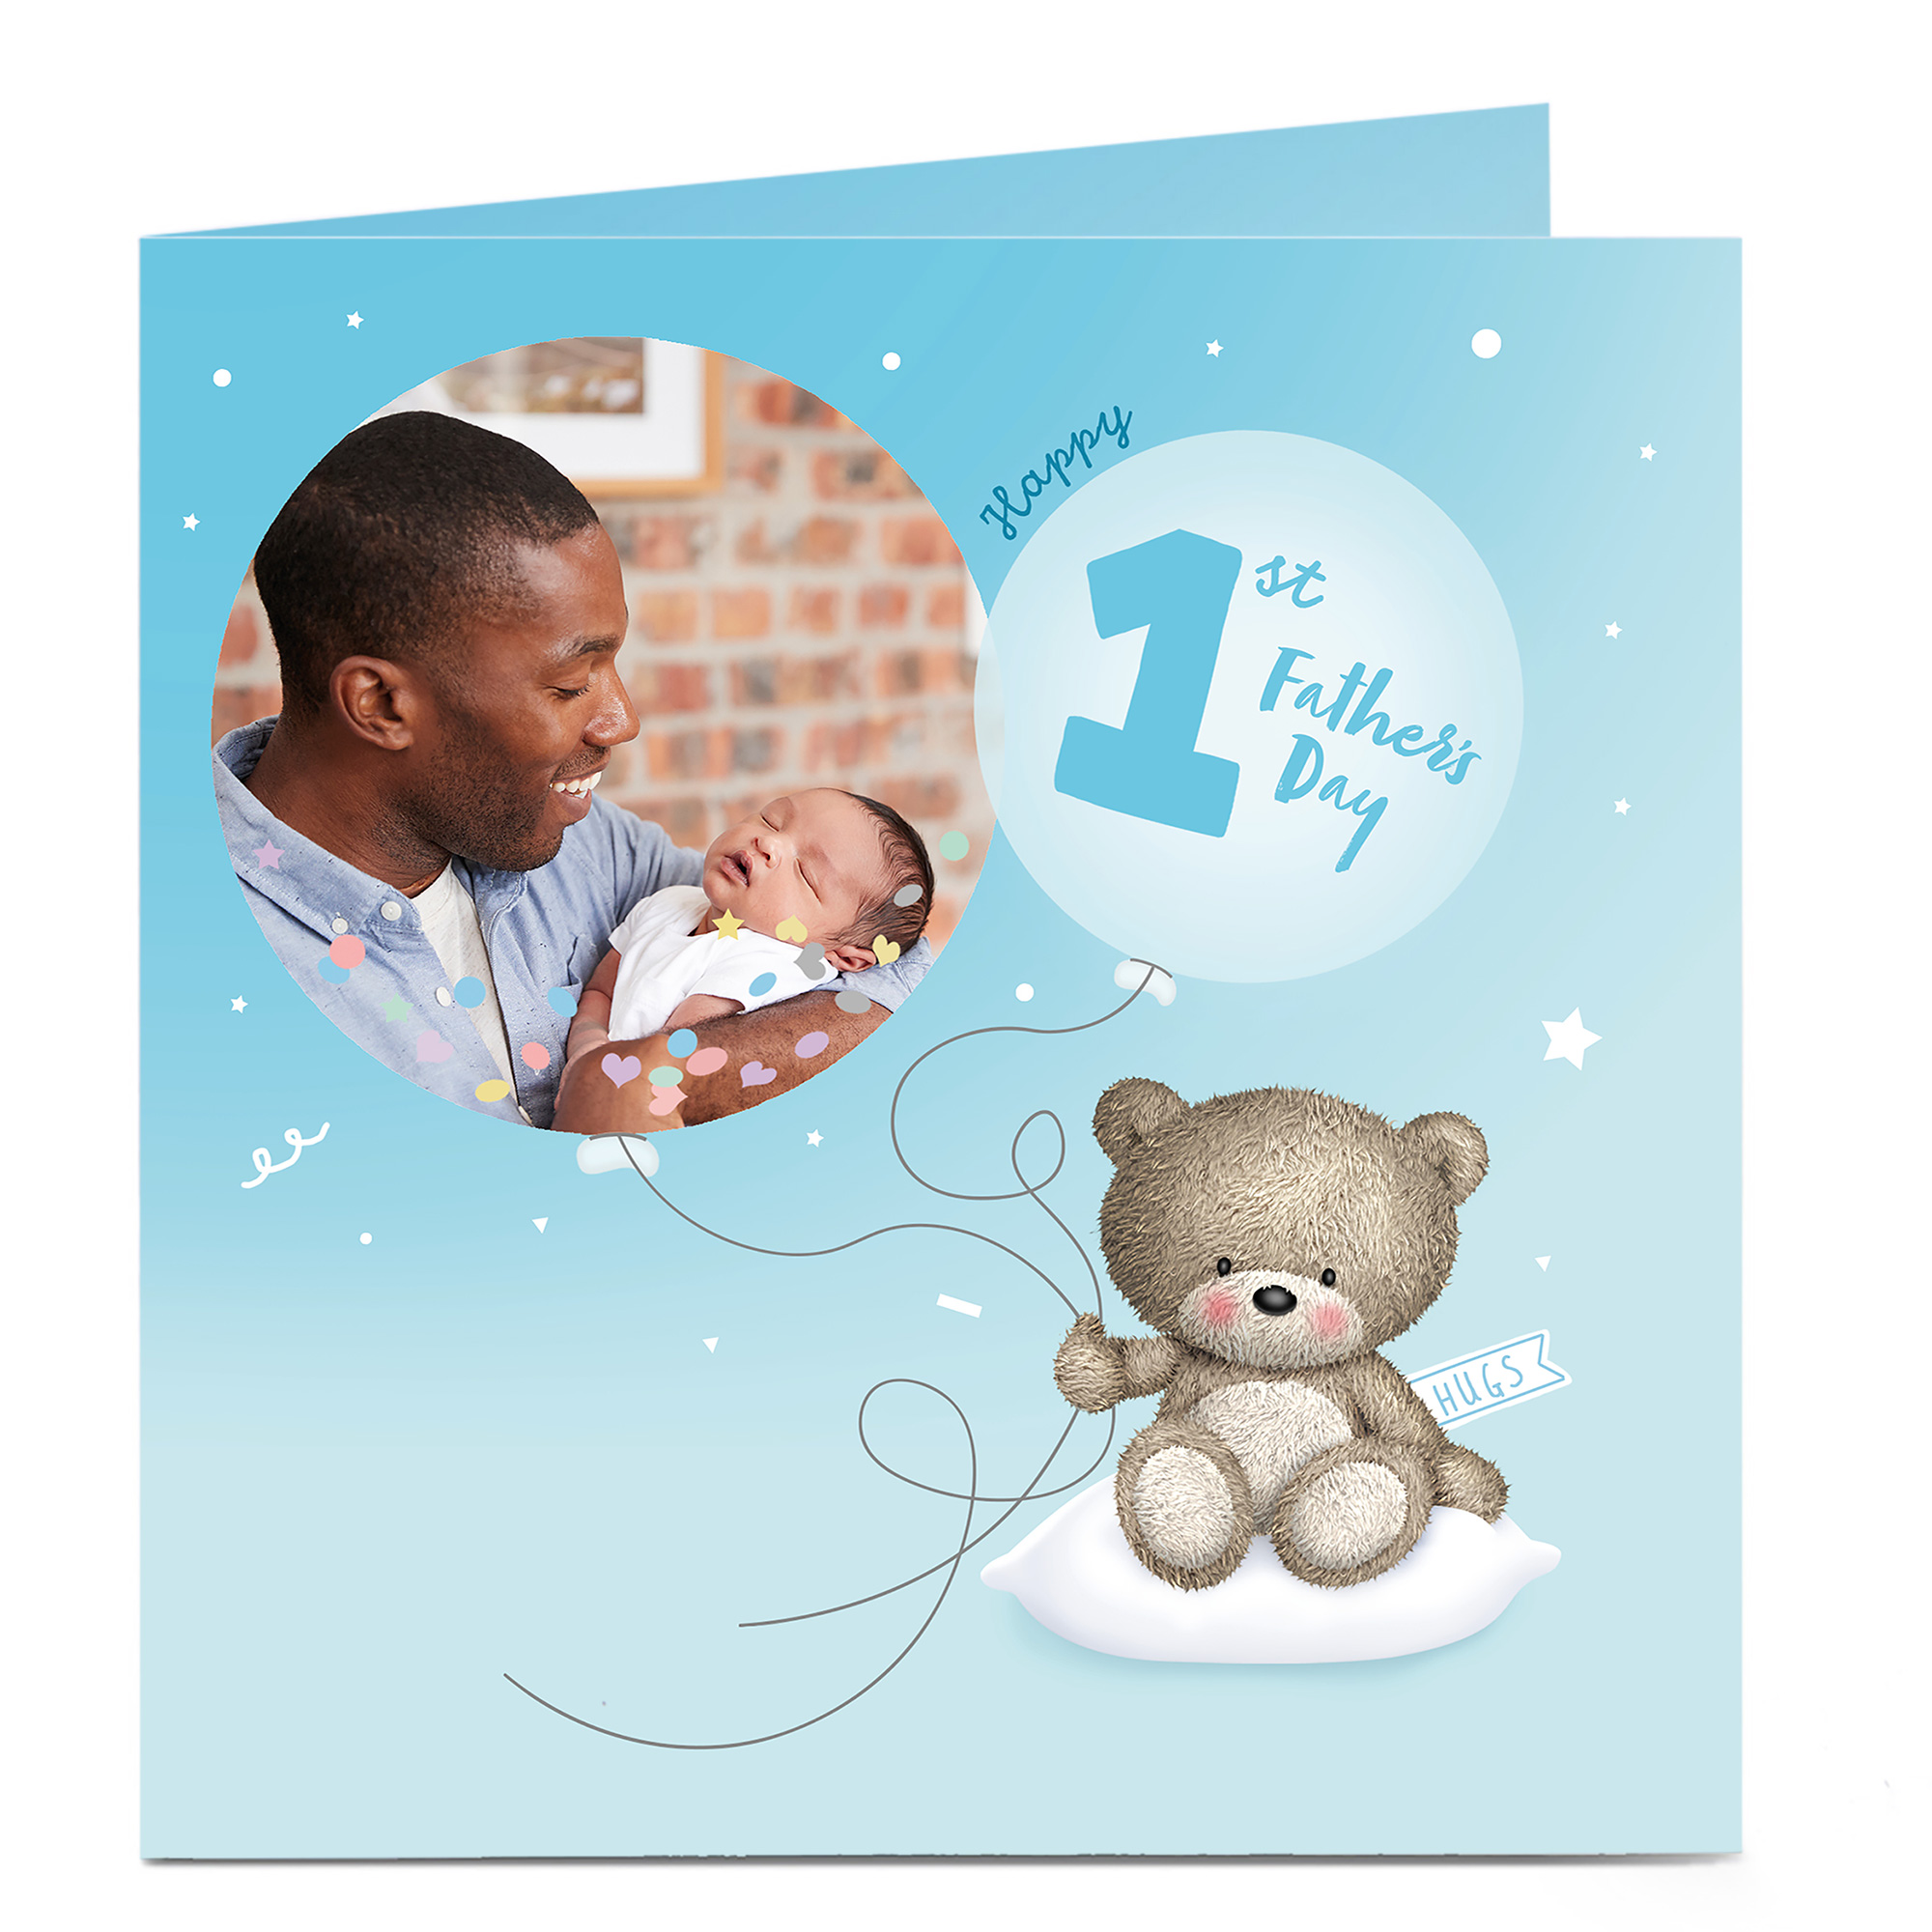 Personalised Father's Day Hugs Photo Card - 1st Father's Day